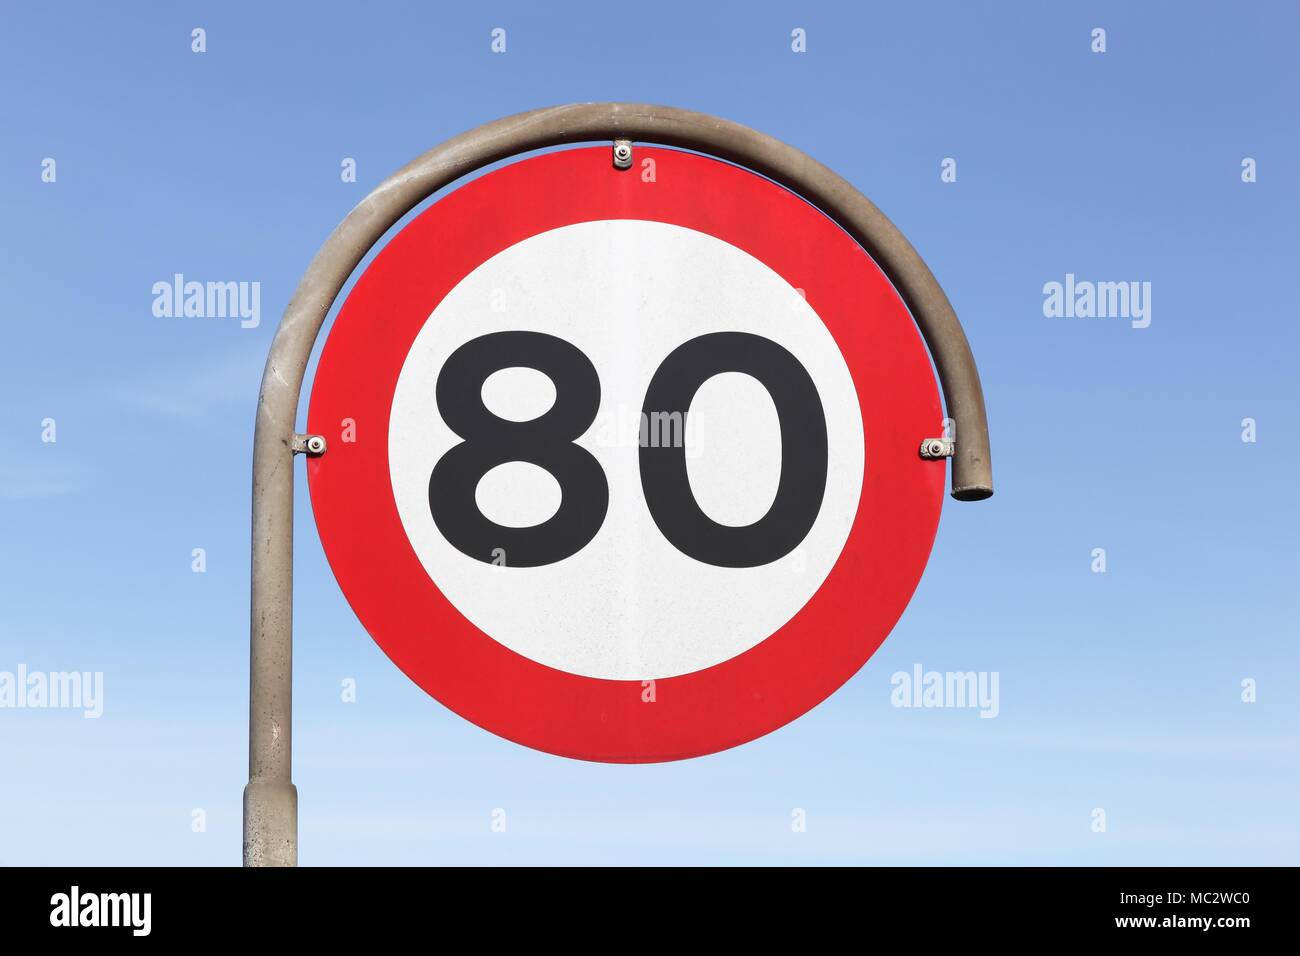 Speed limit traffic sign 80 on the road Stock Photo